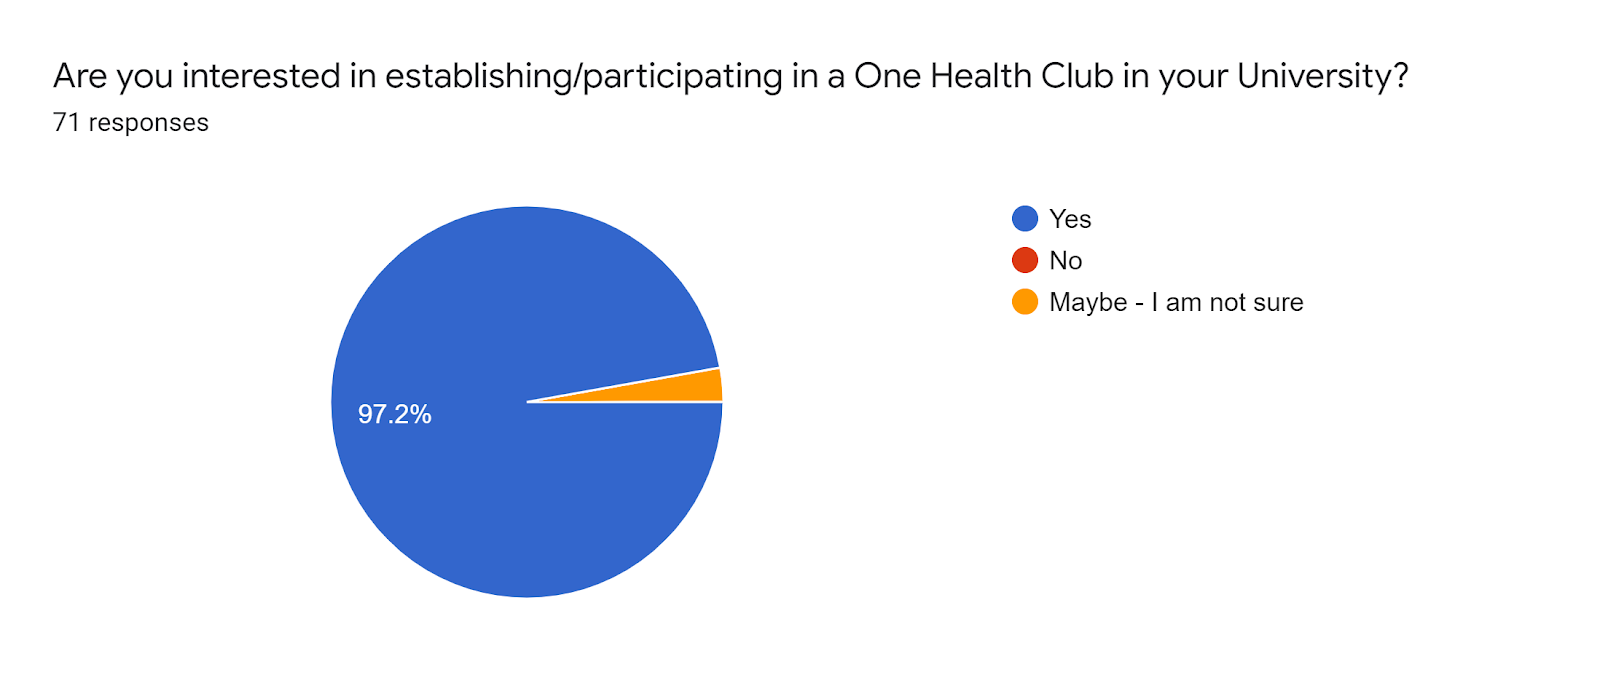 Forms response chart. Question title: Are you interested in establishing/participating in a One Health Club in your University?. Number of responses: 71 responses.